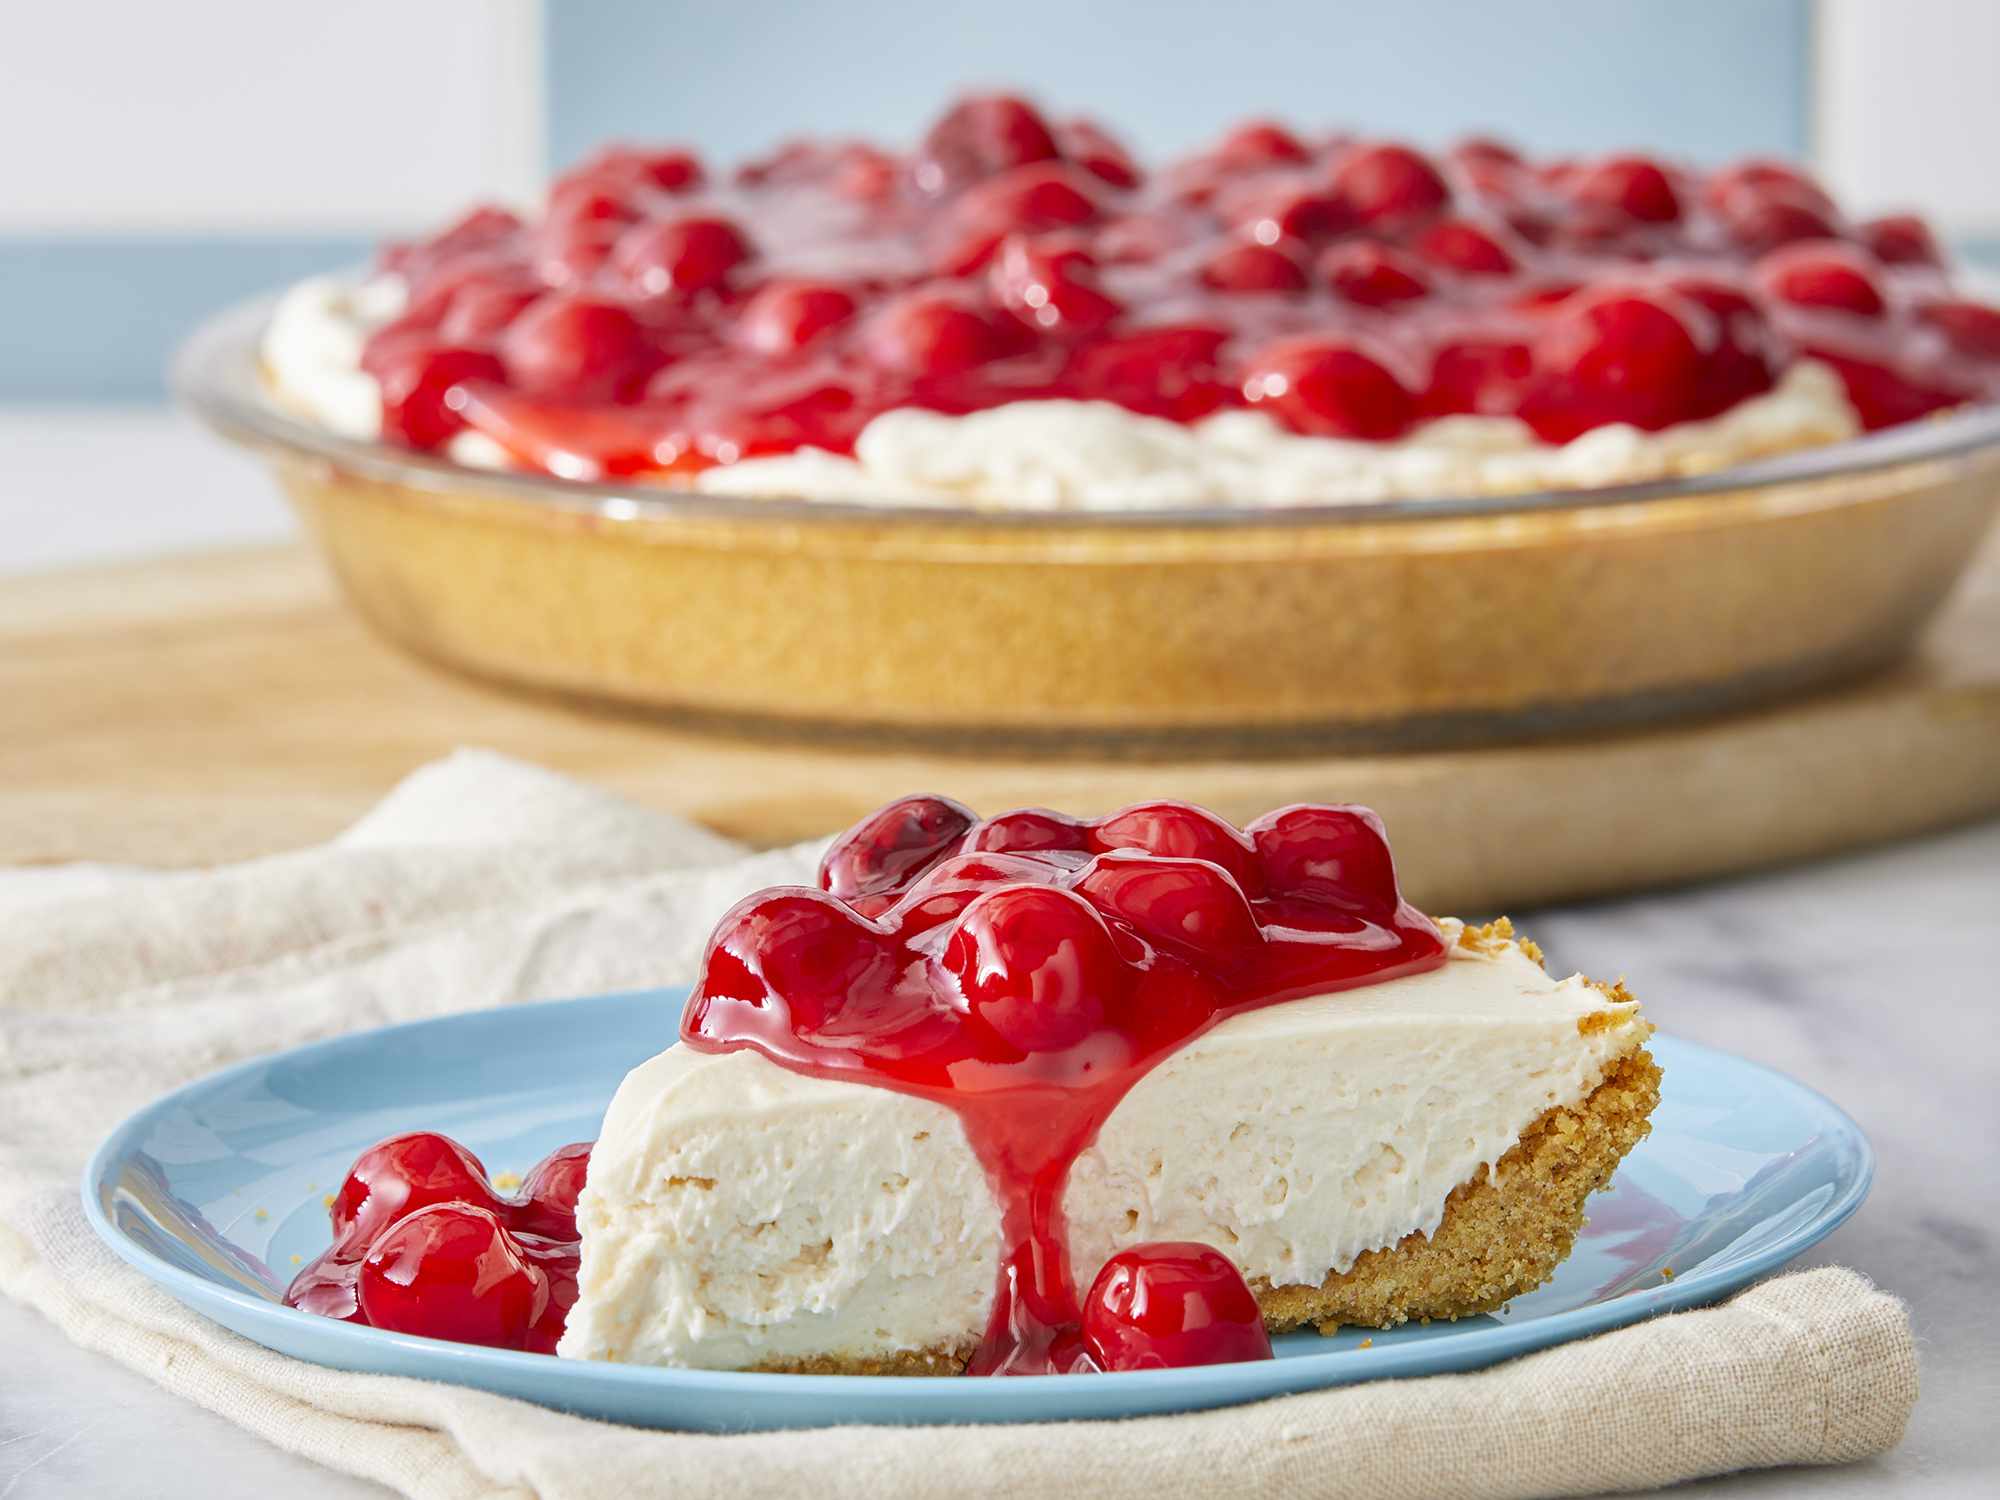 16 No-Bake Cheesecake Recipes That'll Keep Your Kitchen Cool This Summer